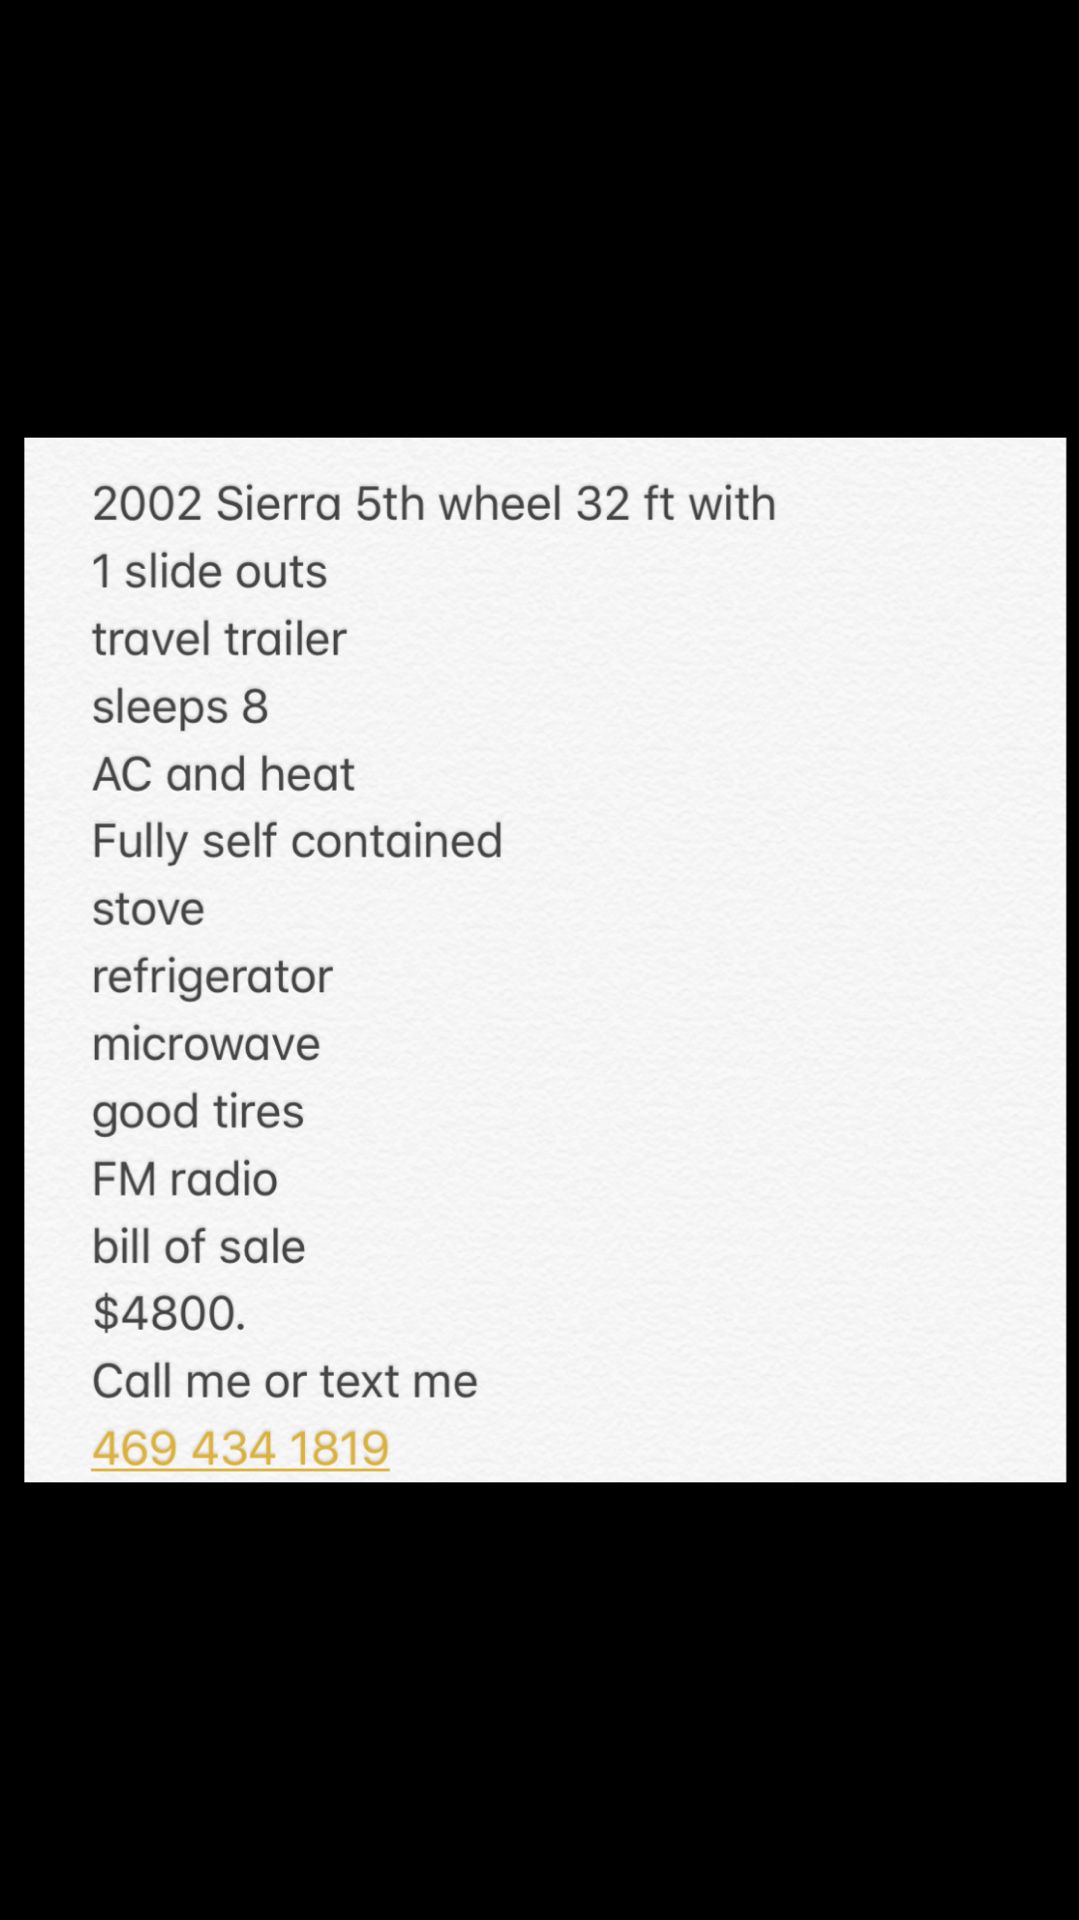 2002 Sierra 5th wheel 32 ft with 1 slide outs travel trailer sleeps 8 AC and heat Fully self contained stove refrigerator microwave good tires